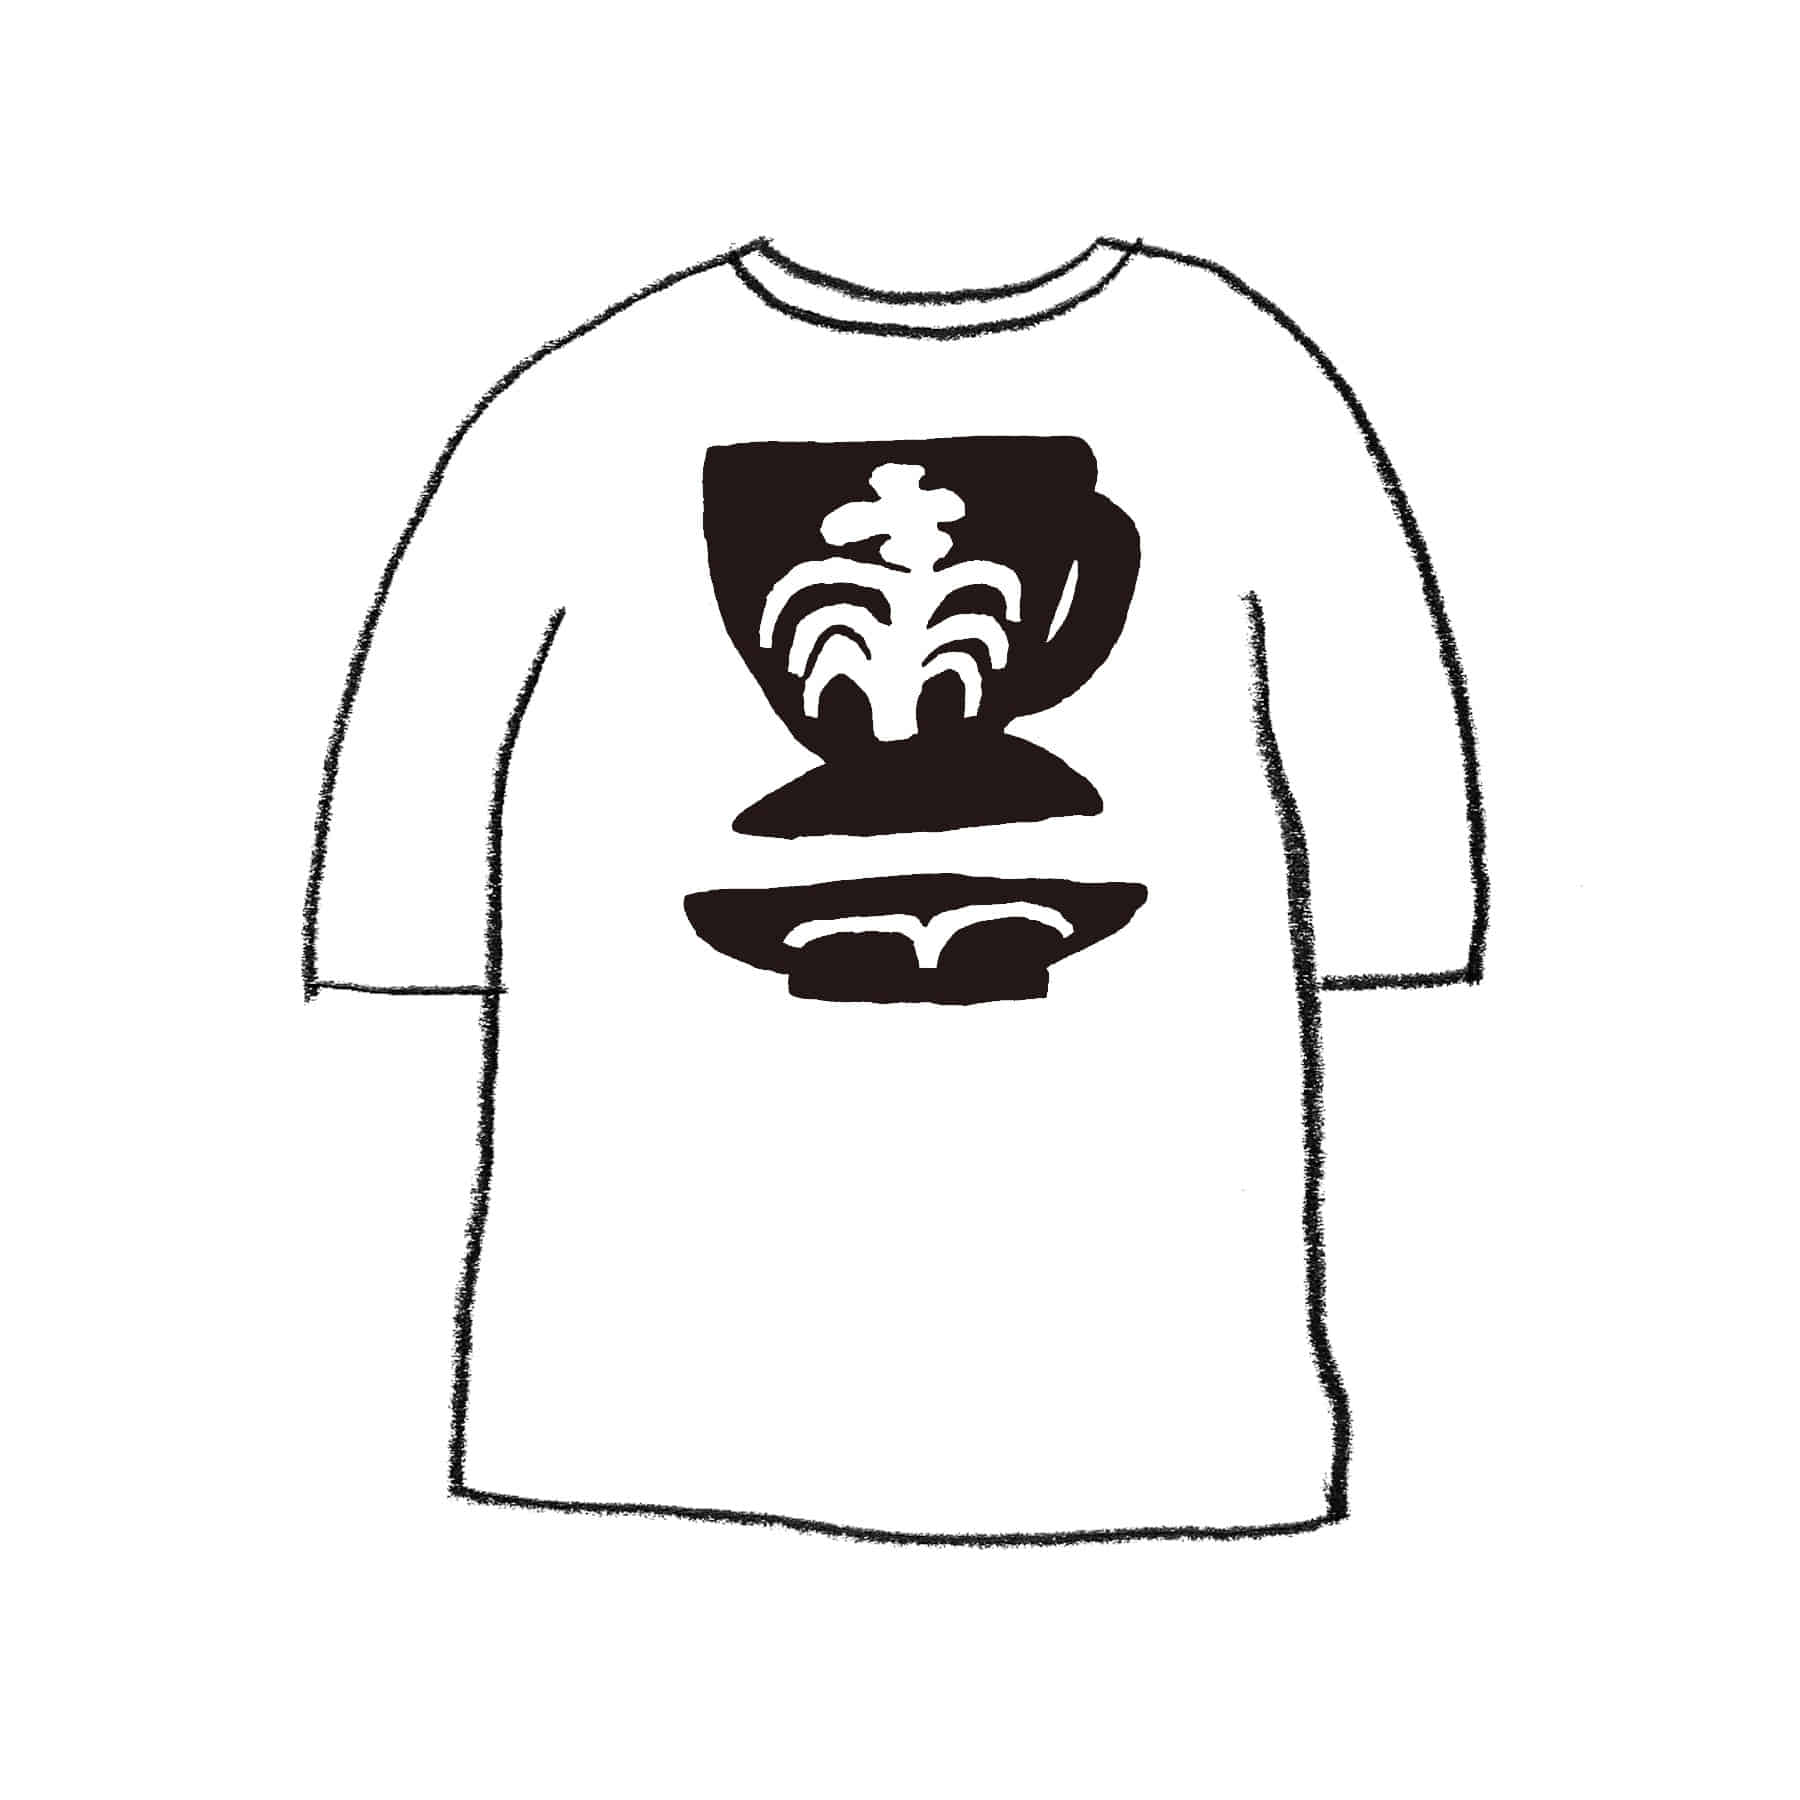 CUP 1/2 T-SHIRT WHITE